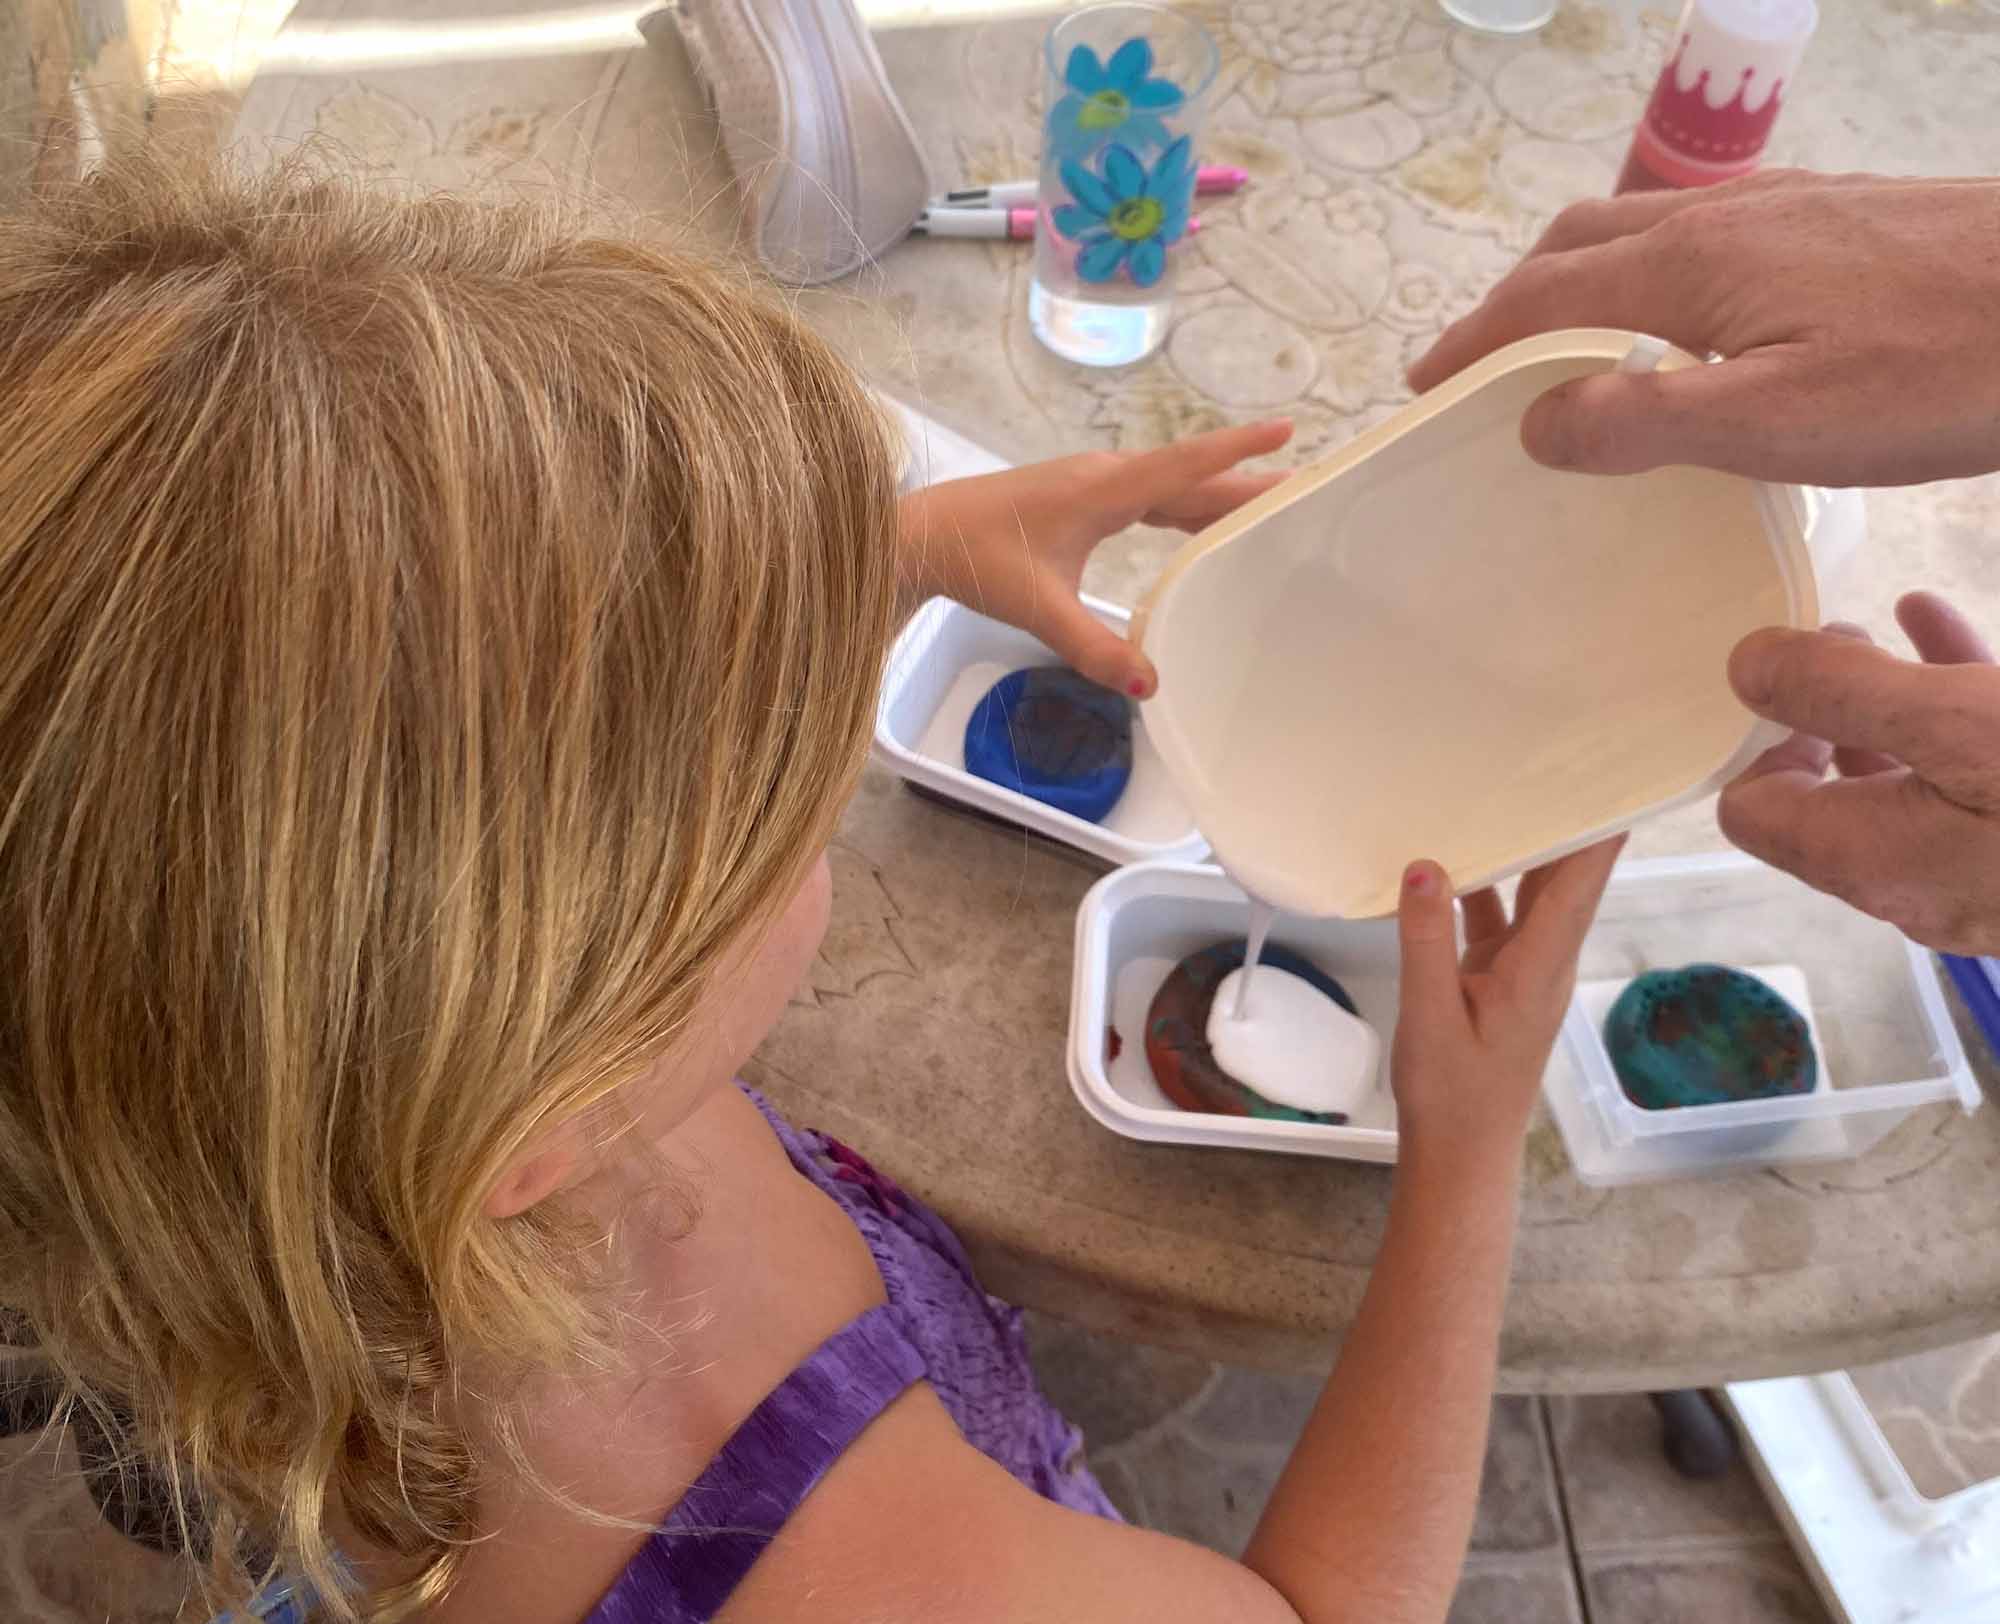 Girl pouring plaster of paris into a plastacine mould, with the help of an adult